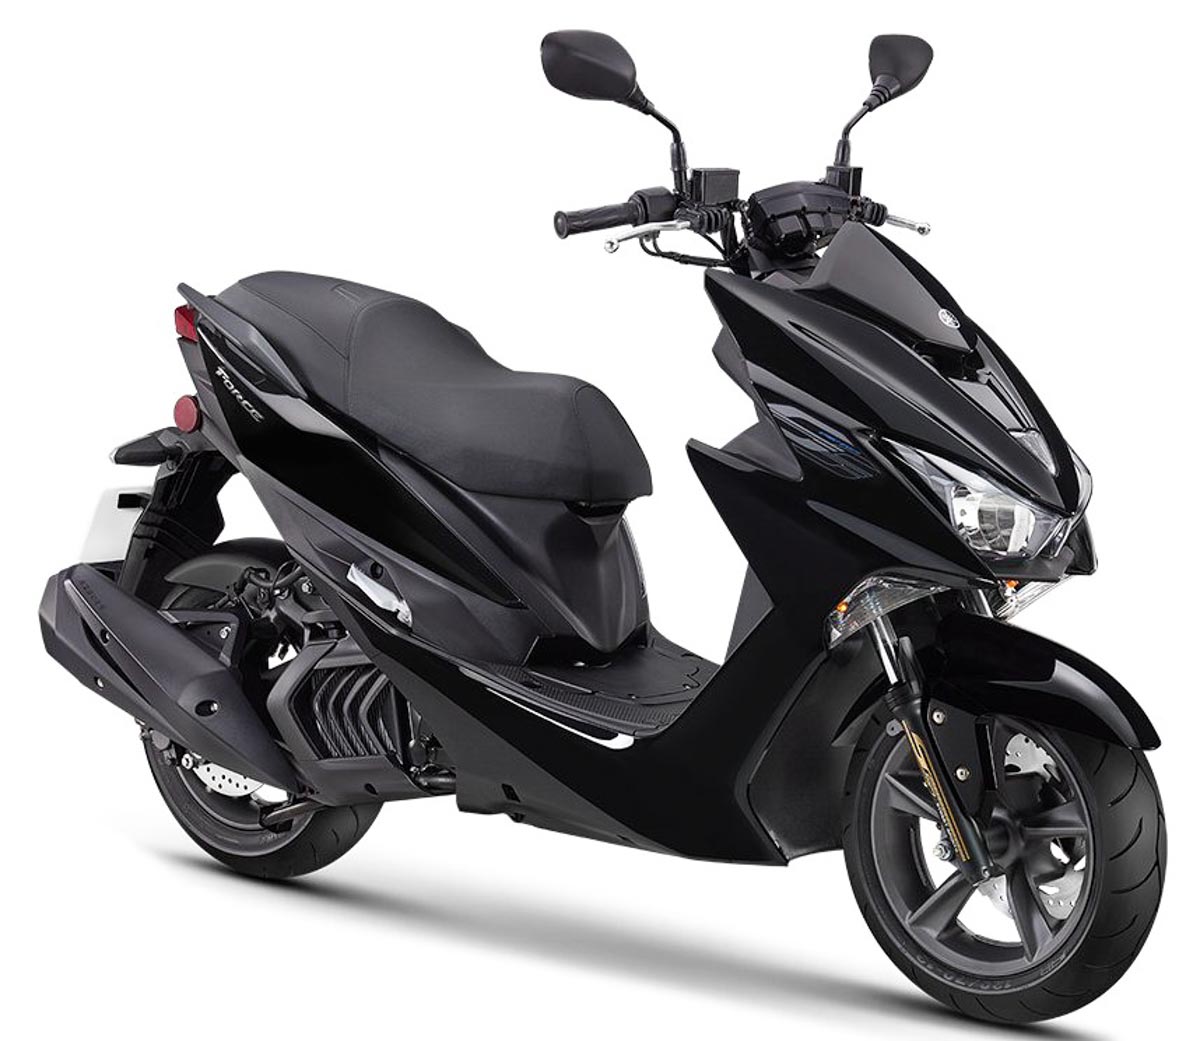 Yamaha Force 155 Moto-Scooter Makes Its Debut